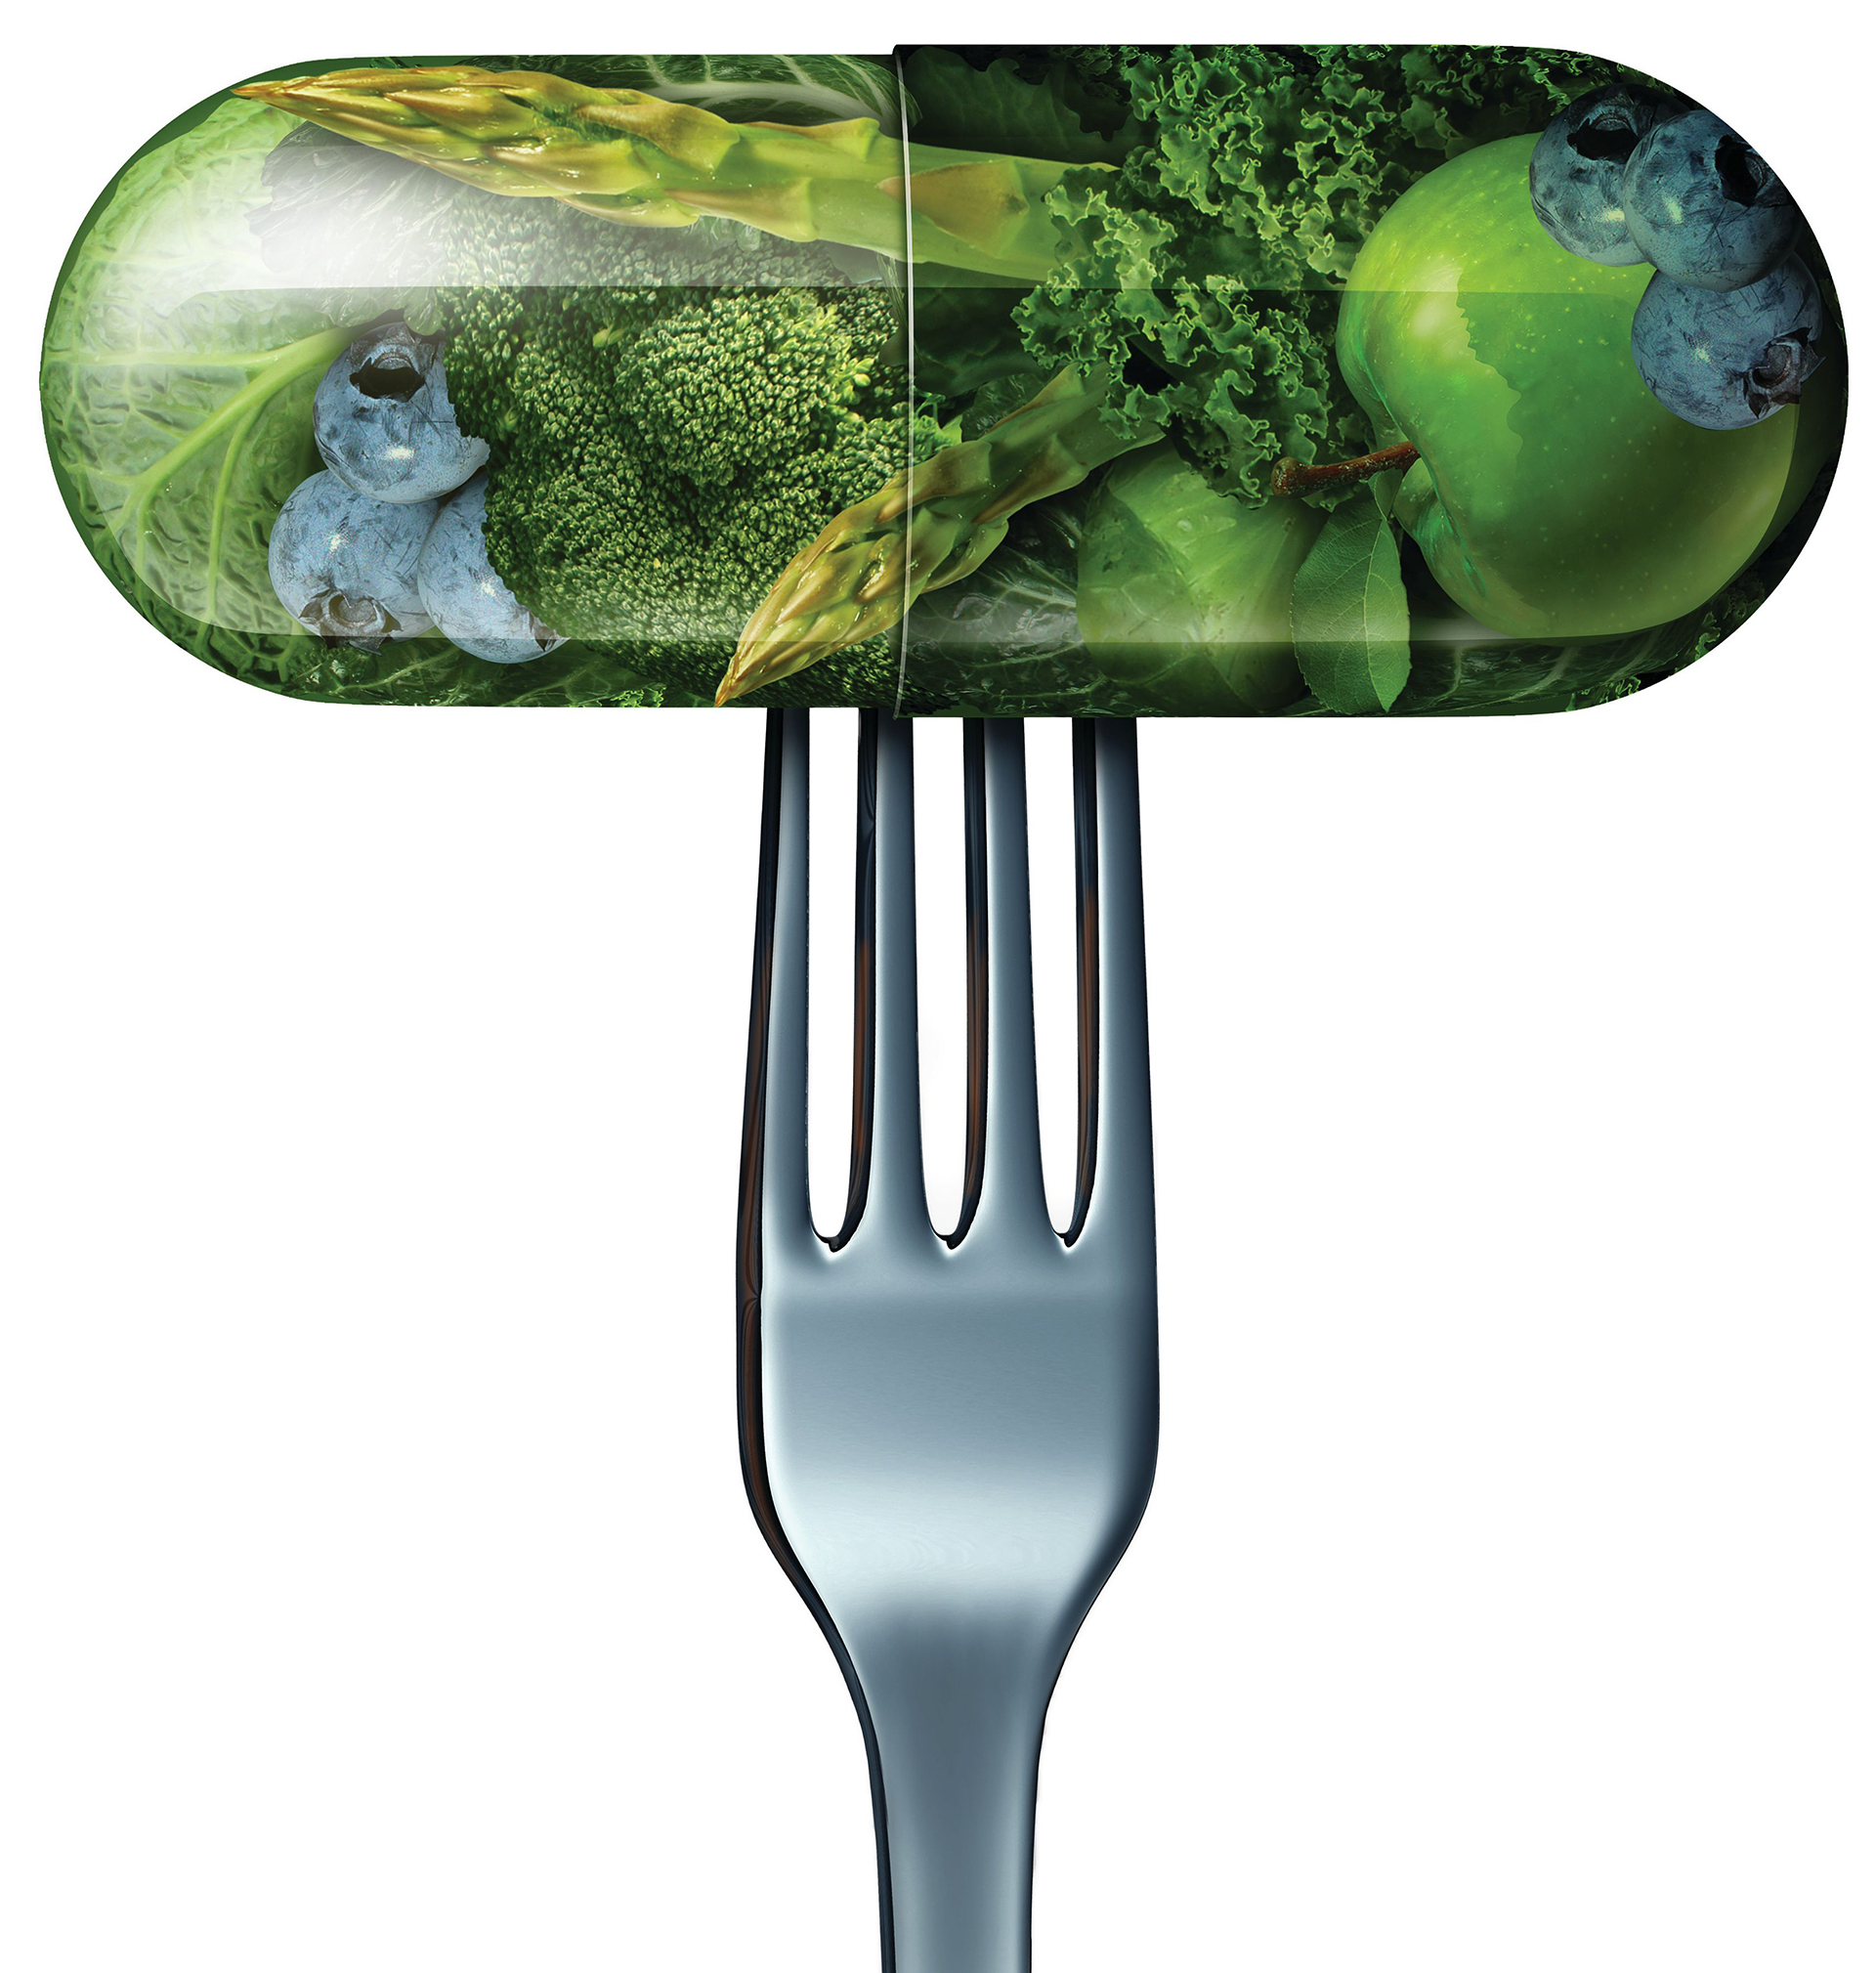 A fork cuts into health-food filled supplement capsule